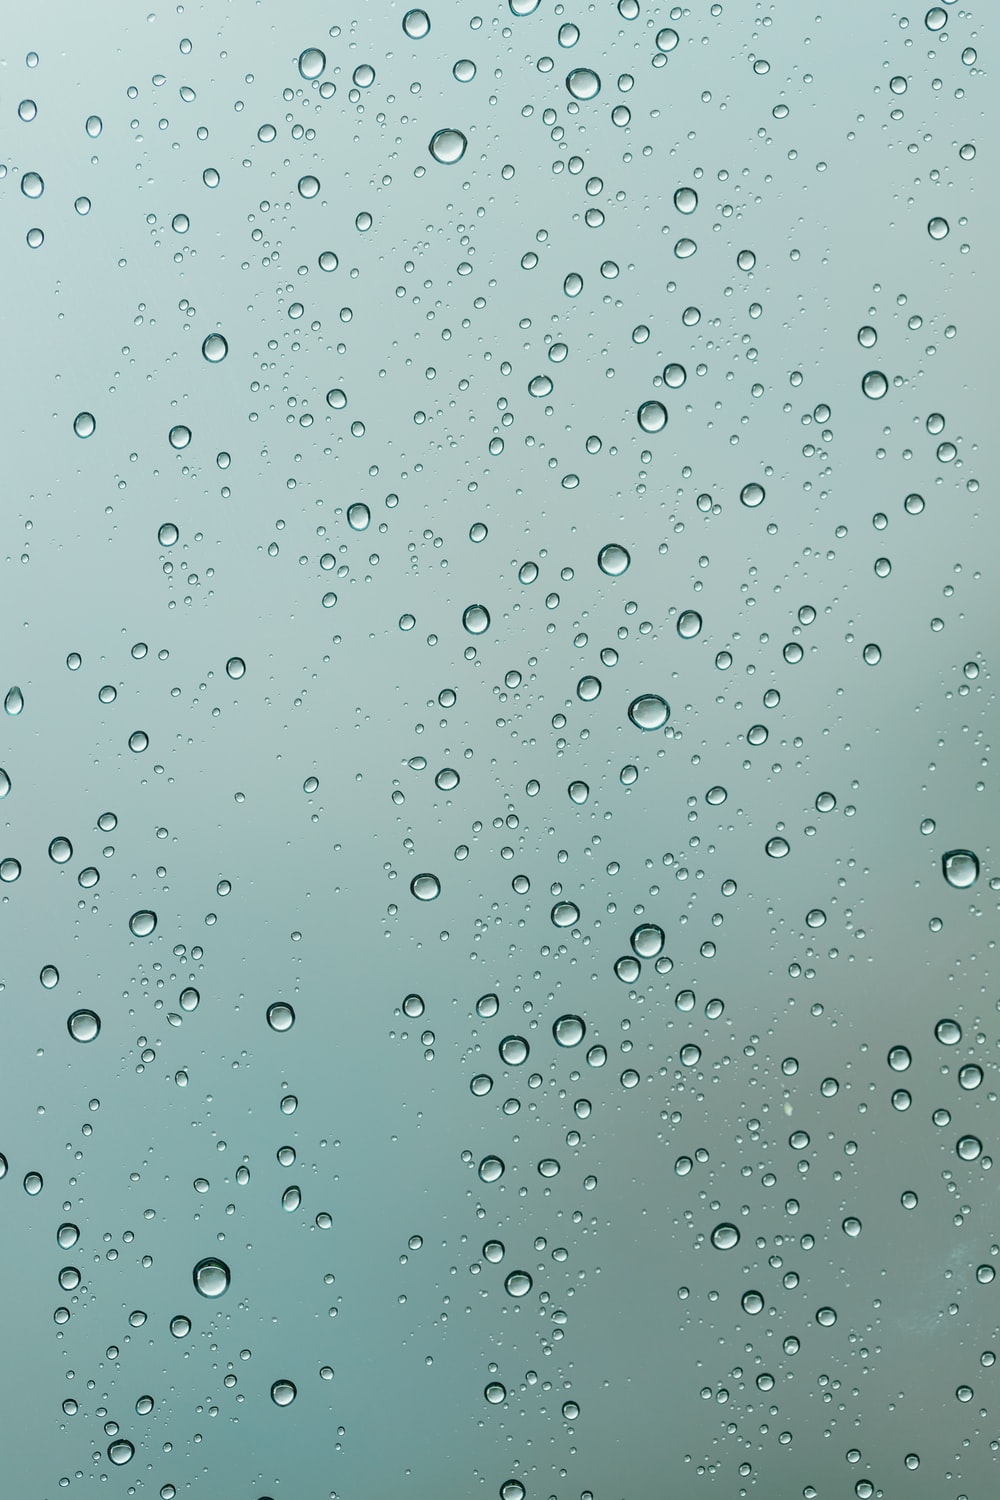 Rain Drops On Window Pictures Download Free Images on